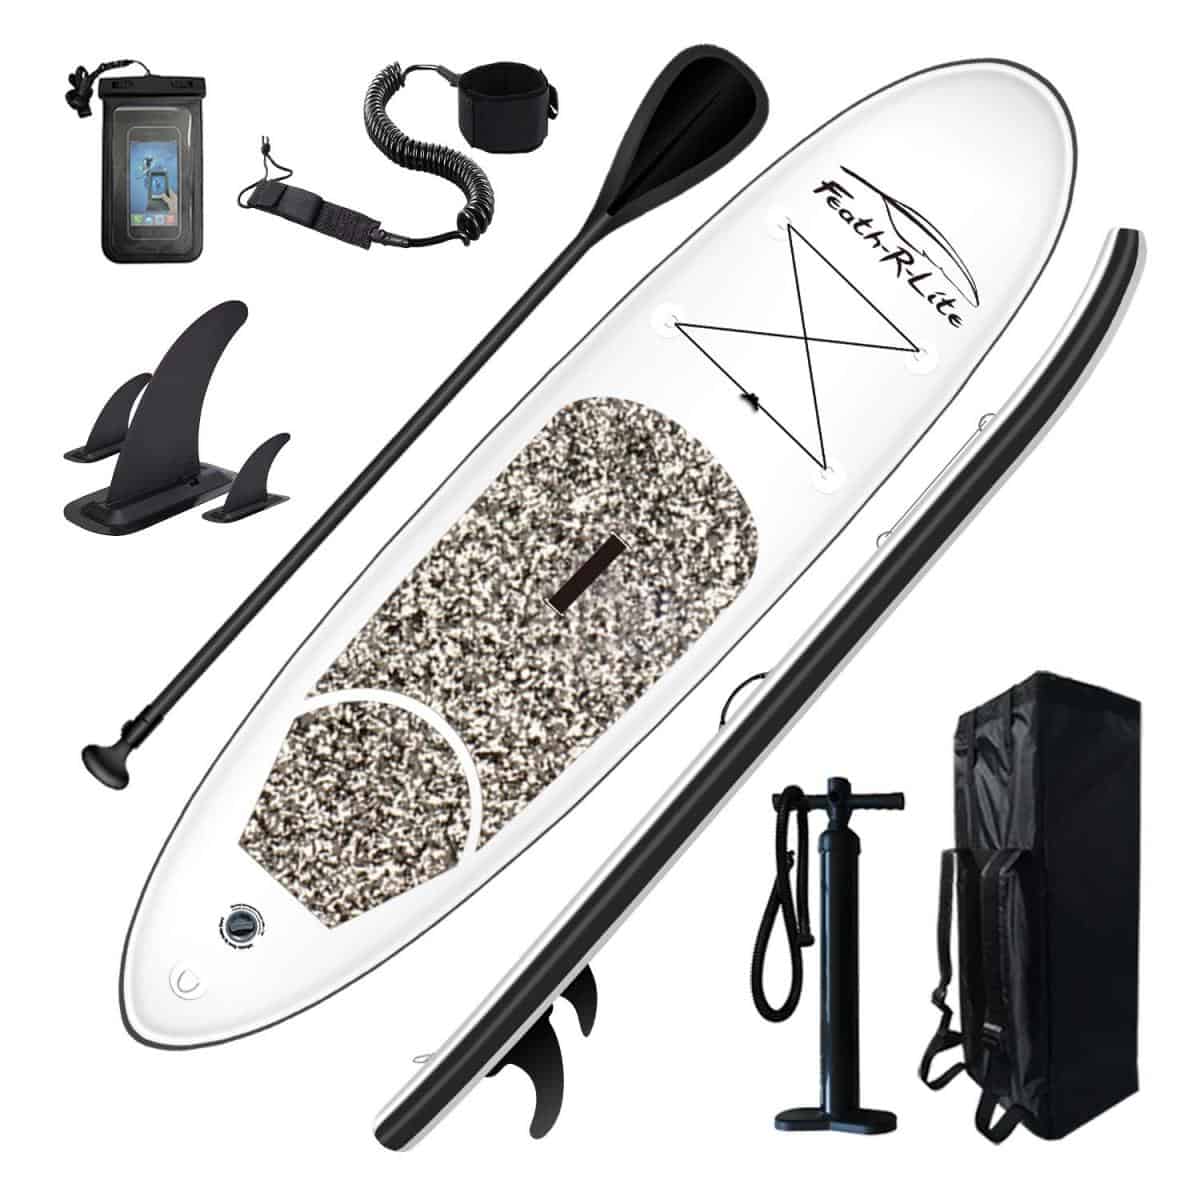 Feath-R-Light Inflatable Stand Up Paddle Board – Our opinion